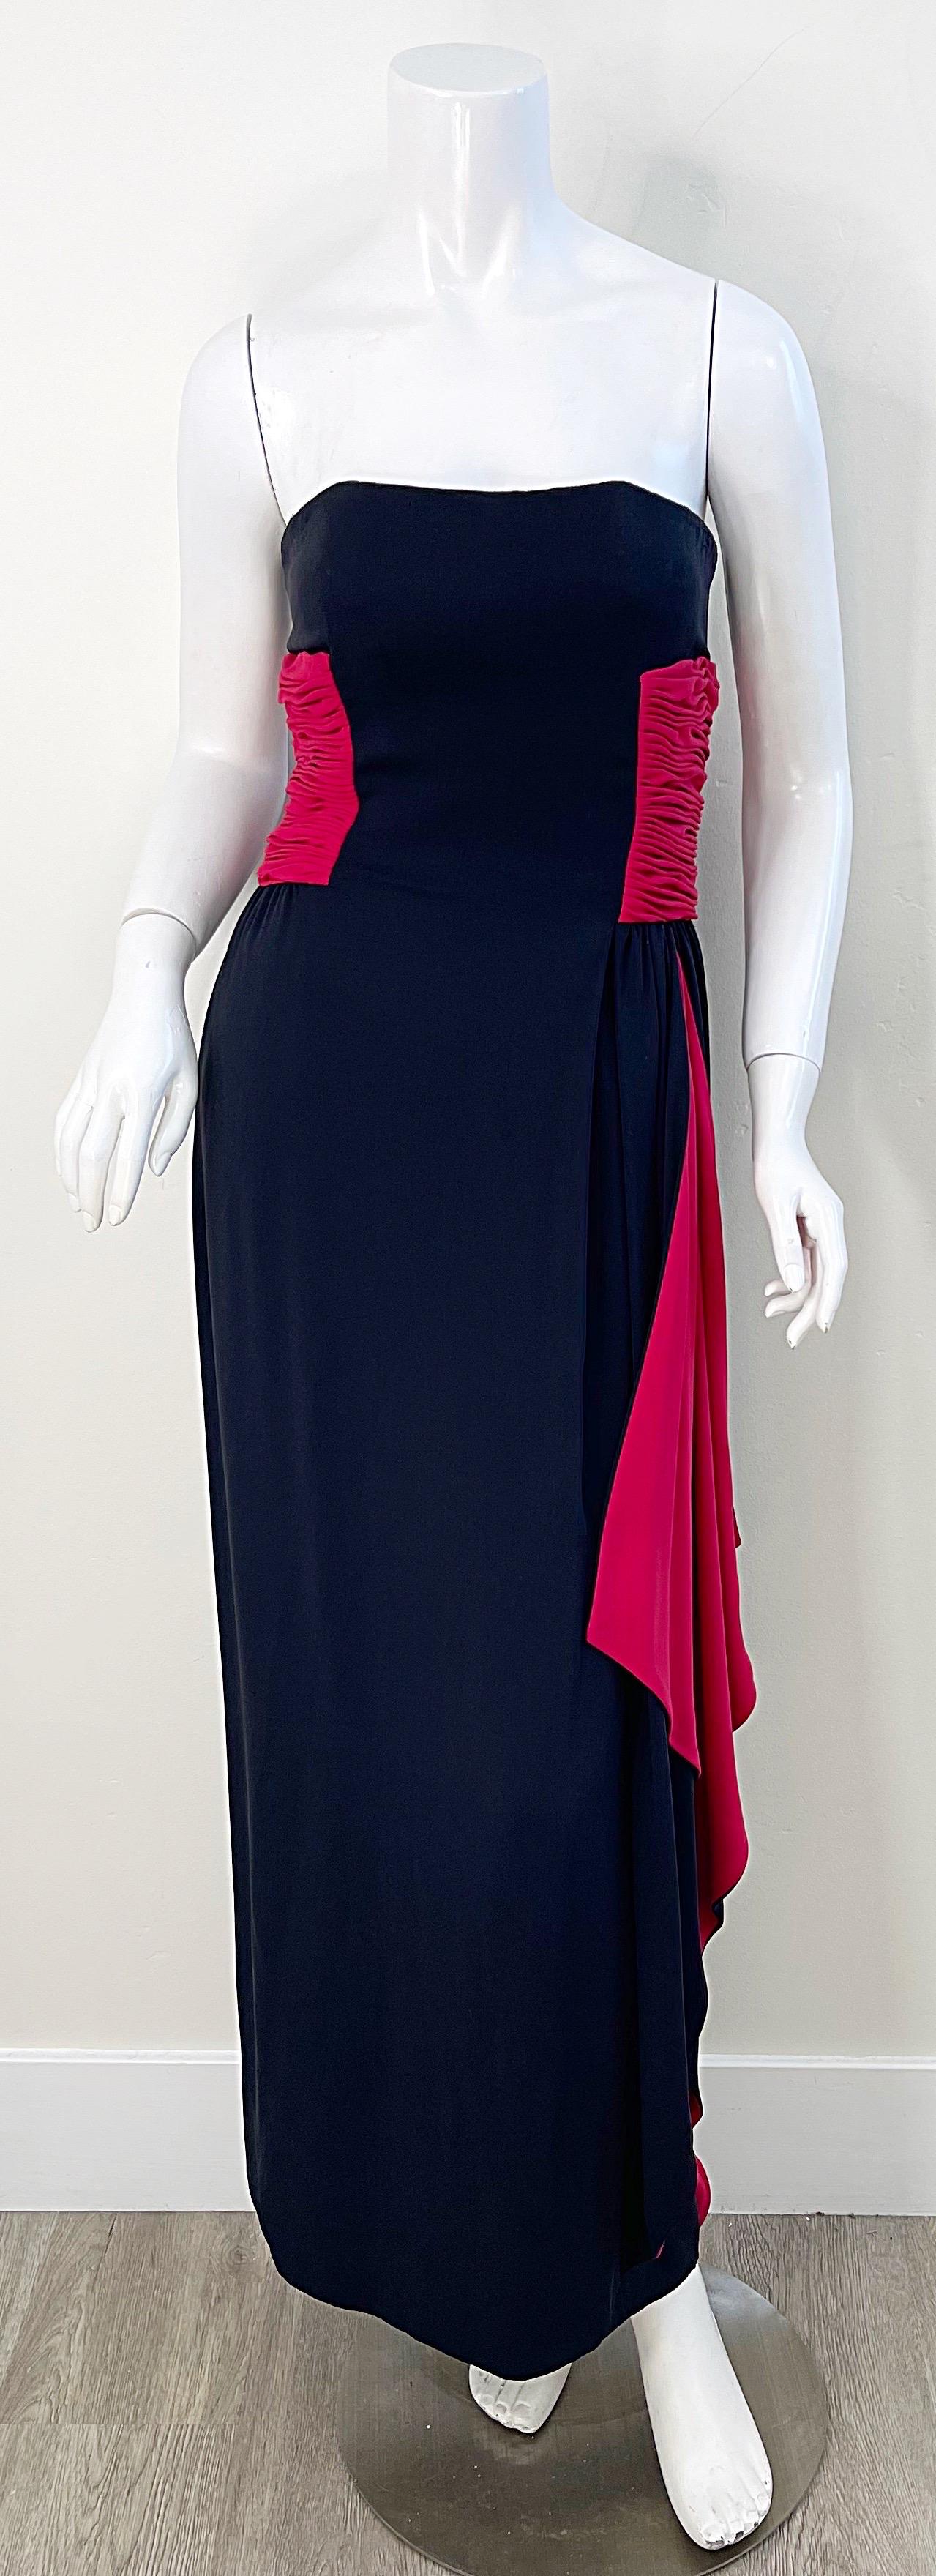 Beautiful and timeless 1980s VALENTINO silk jersey black and red strapless evening gown ! This dress has so much attention to details. Has a built in boned corset inside to hold everything in place. Peek-a-boo red accents make this so much more than